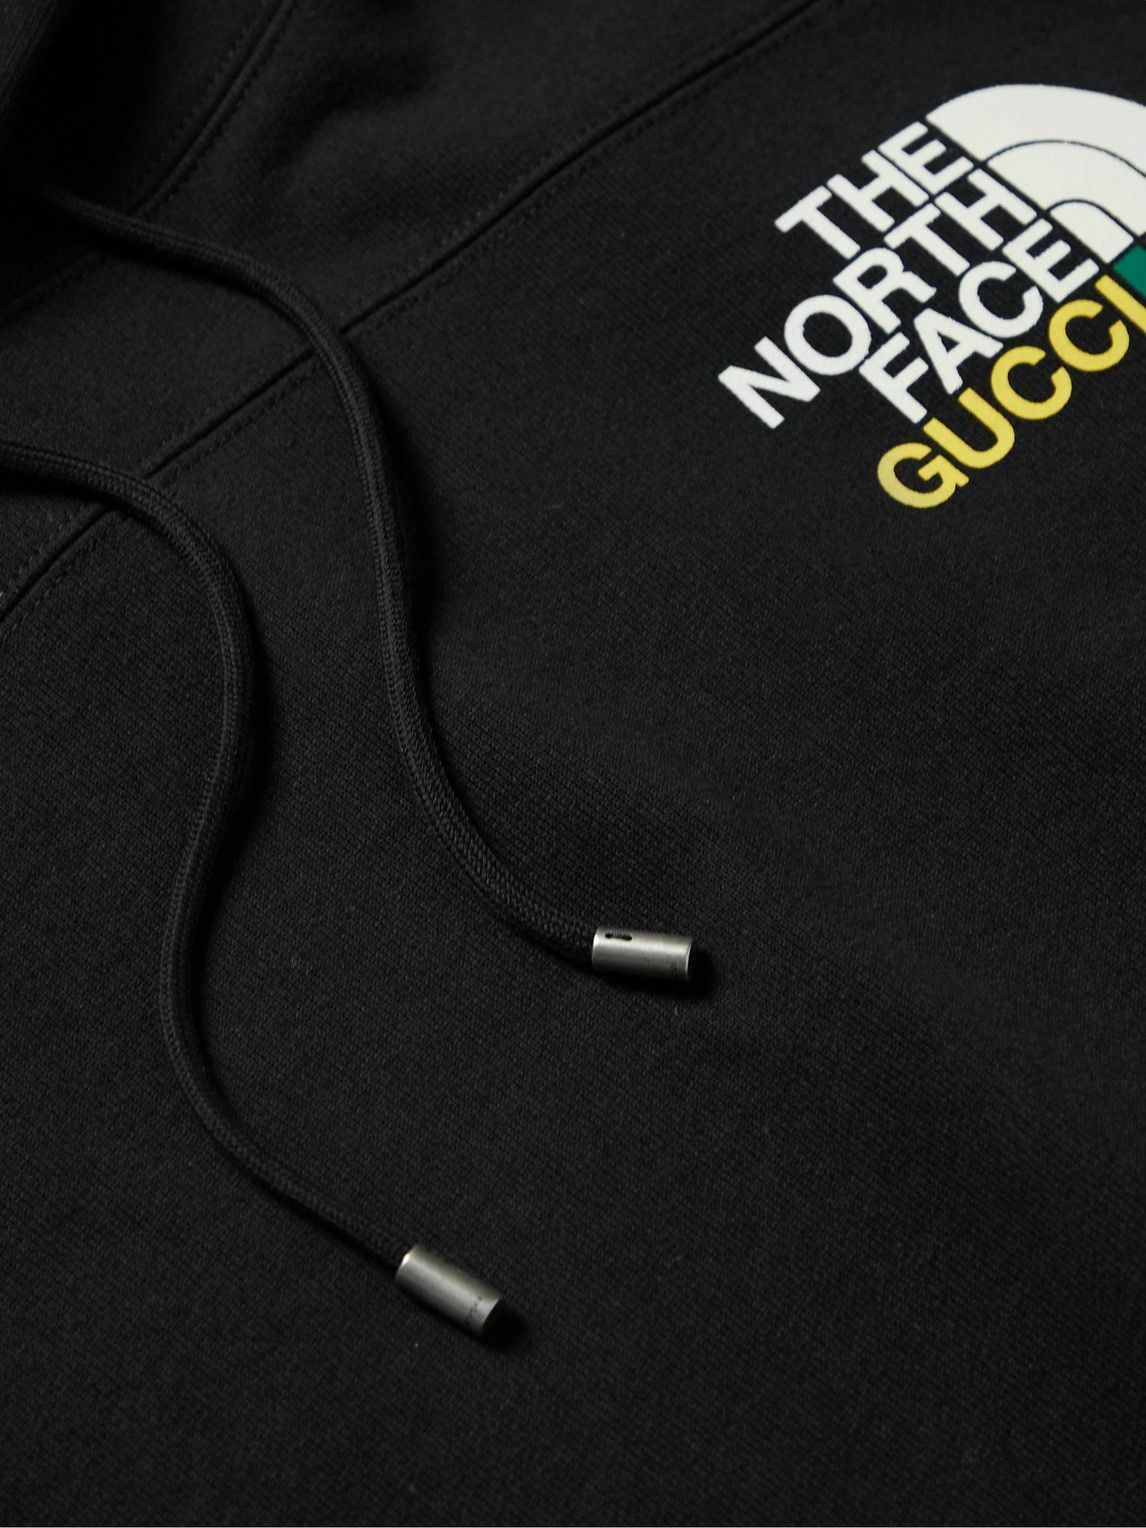 GUCCI - The North Face Logo-Print Cotton-Jersey Hoodie - Black Gucci